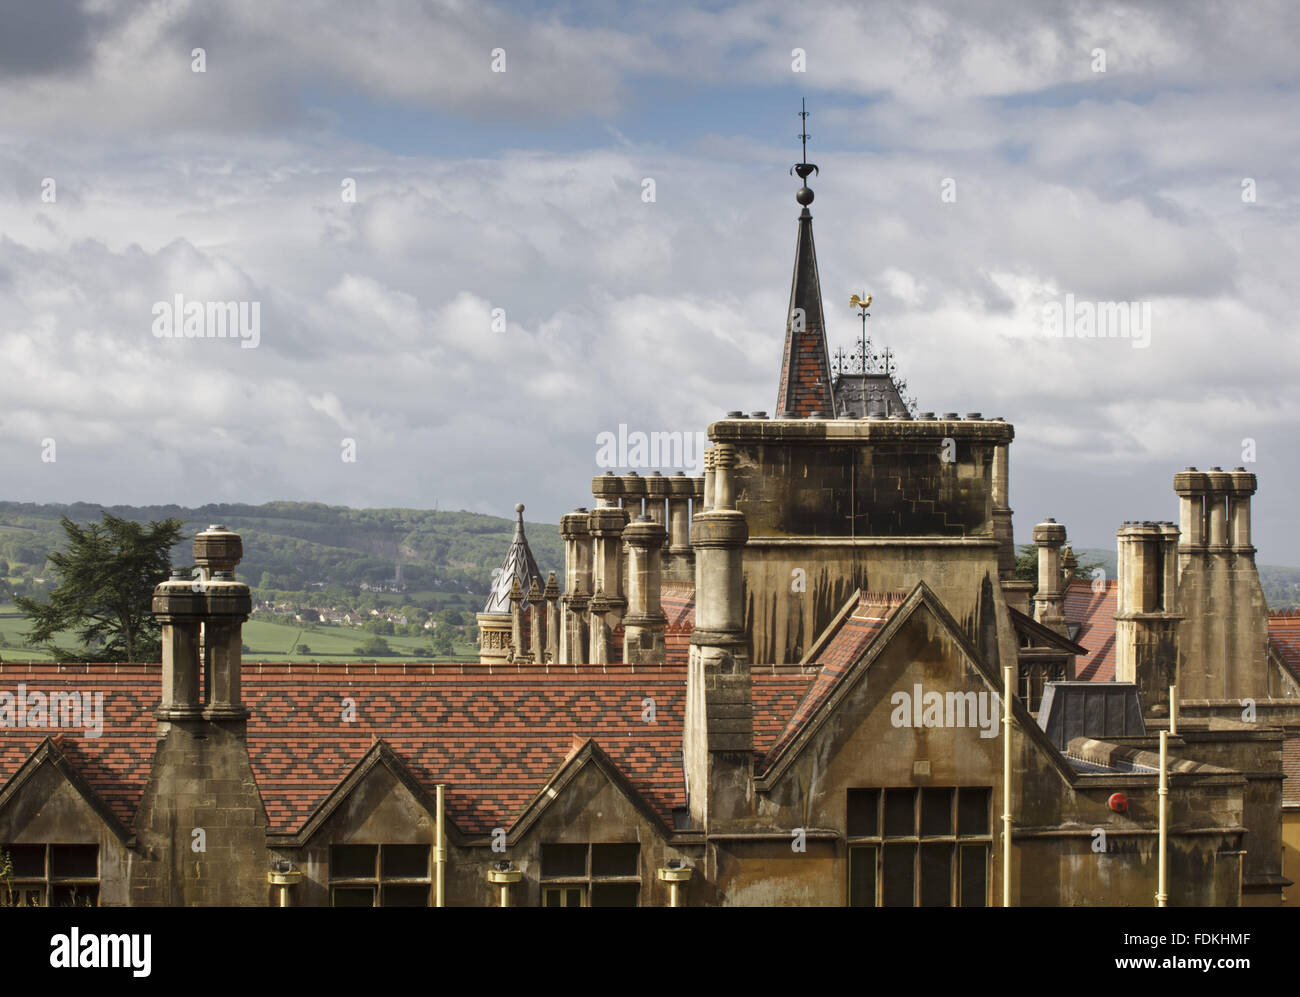 View looking down from the driveway, of Turrets and Gothic roofscapes at Tyntesfield, North Somerset Stock Photo